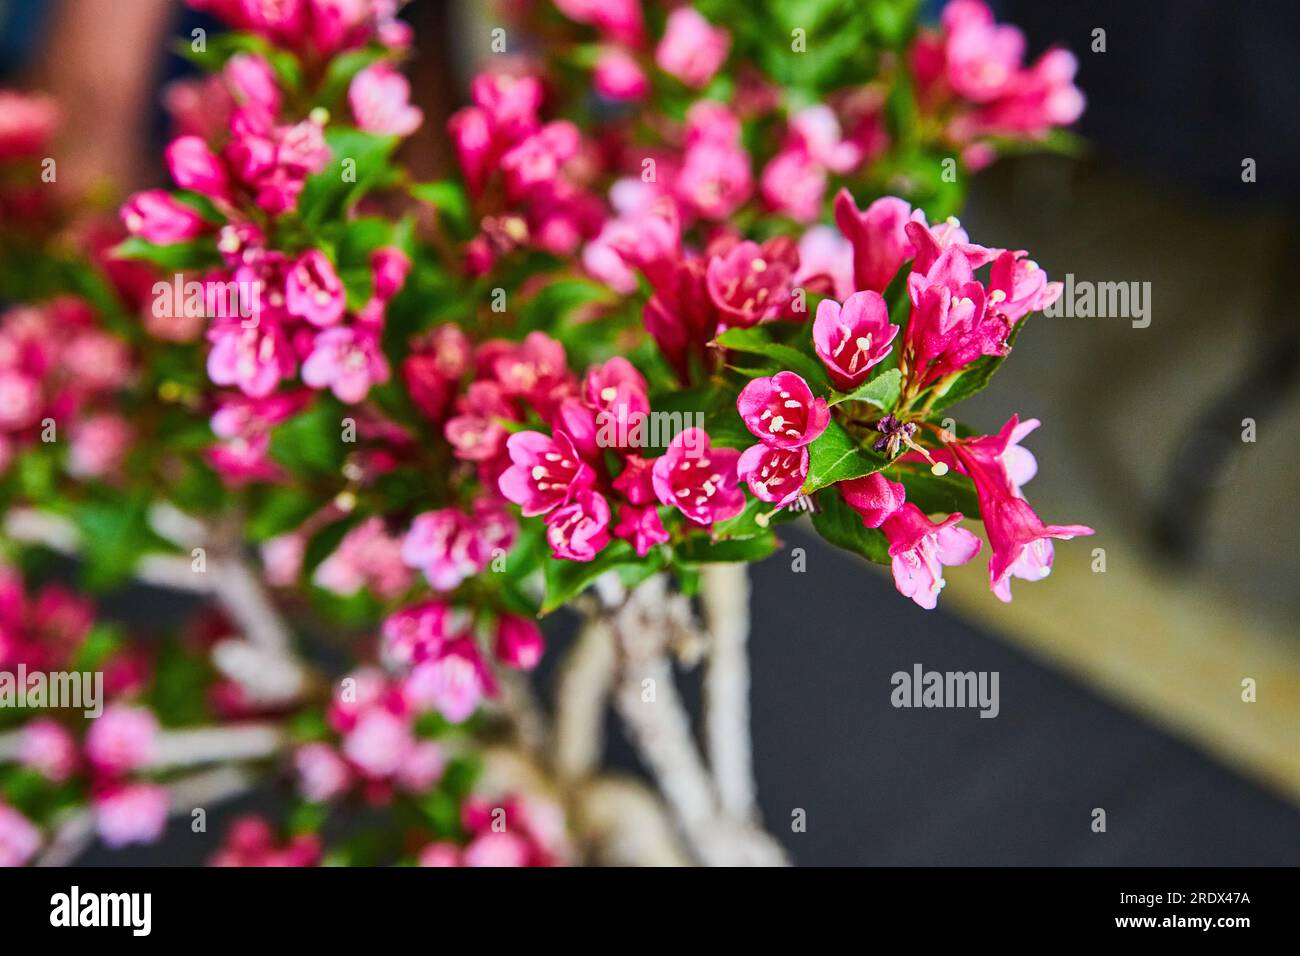 Escallonia evergreen bonsai shrub with vibrant pink flowers blooming in close up shot of petals Stock Photo